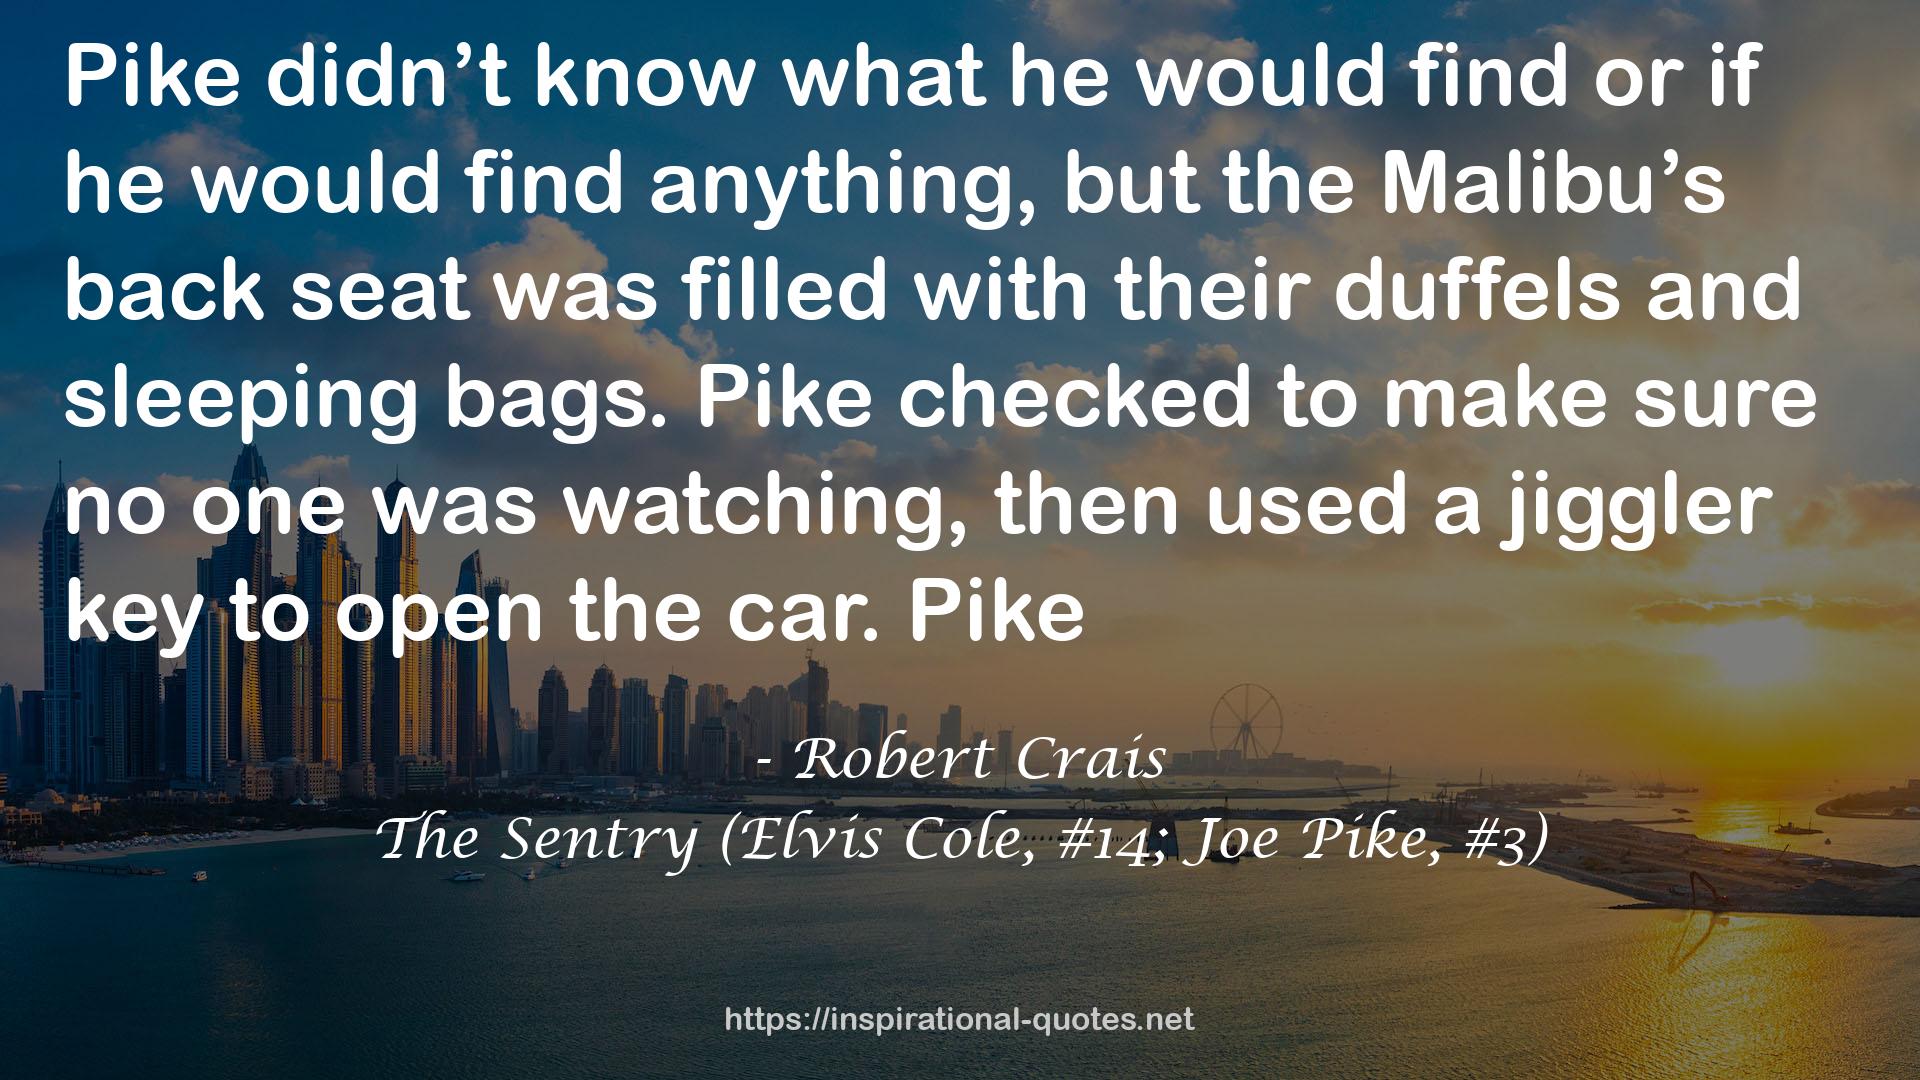 The Sentry (Elvis Cole, #14; Joe Pike, #3) QUOTES